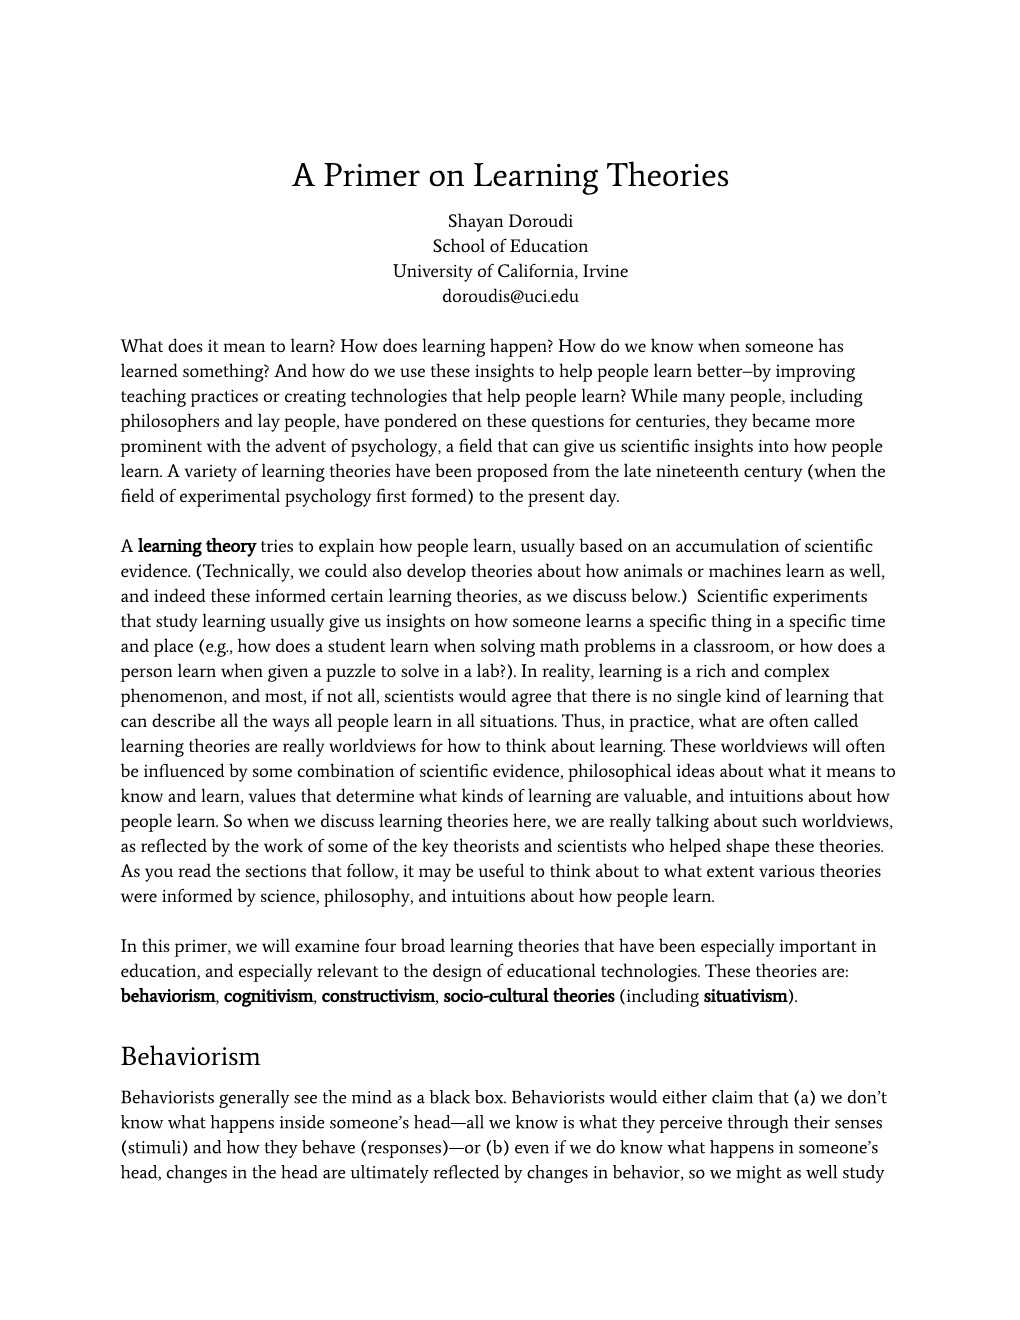 Learning Theories Primer